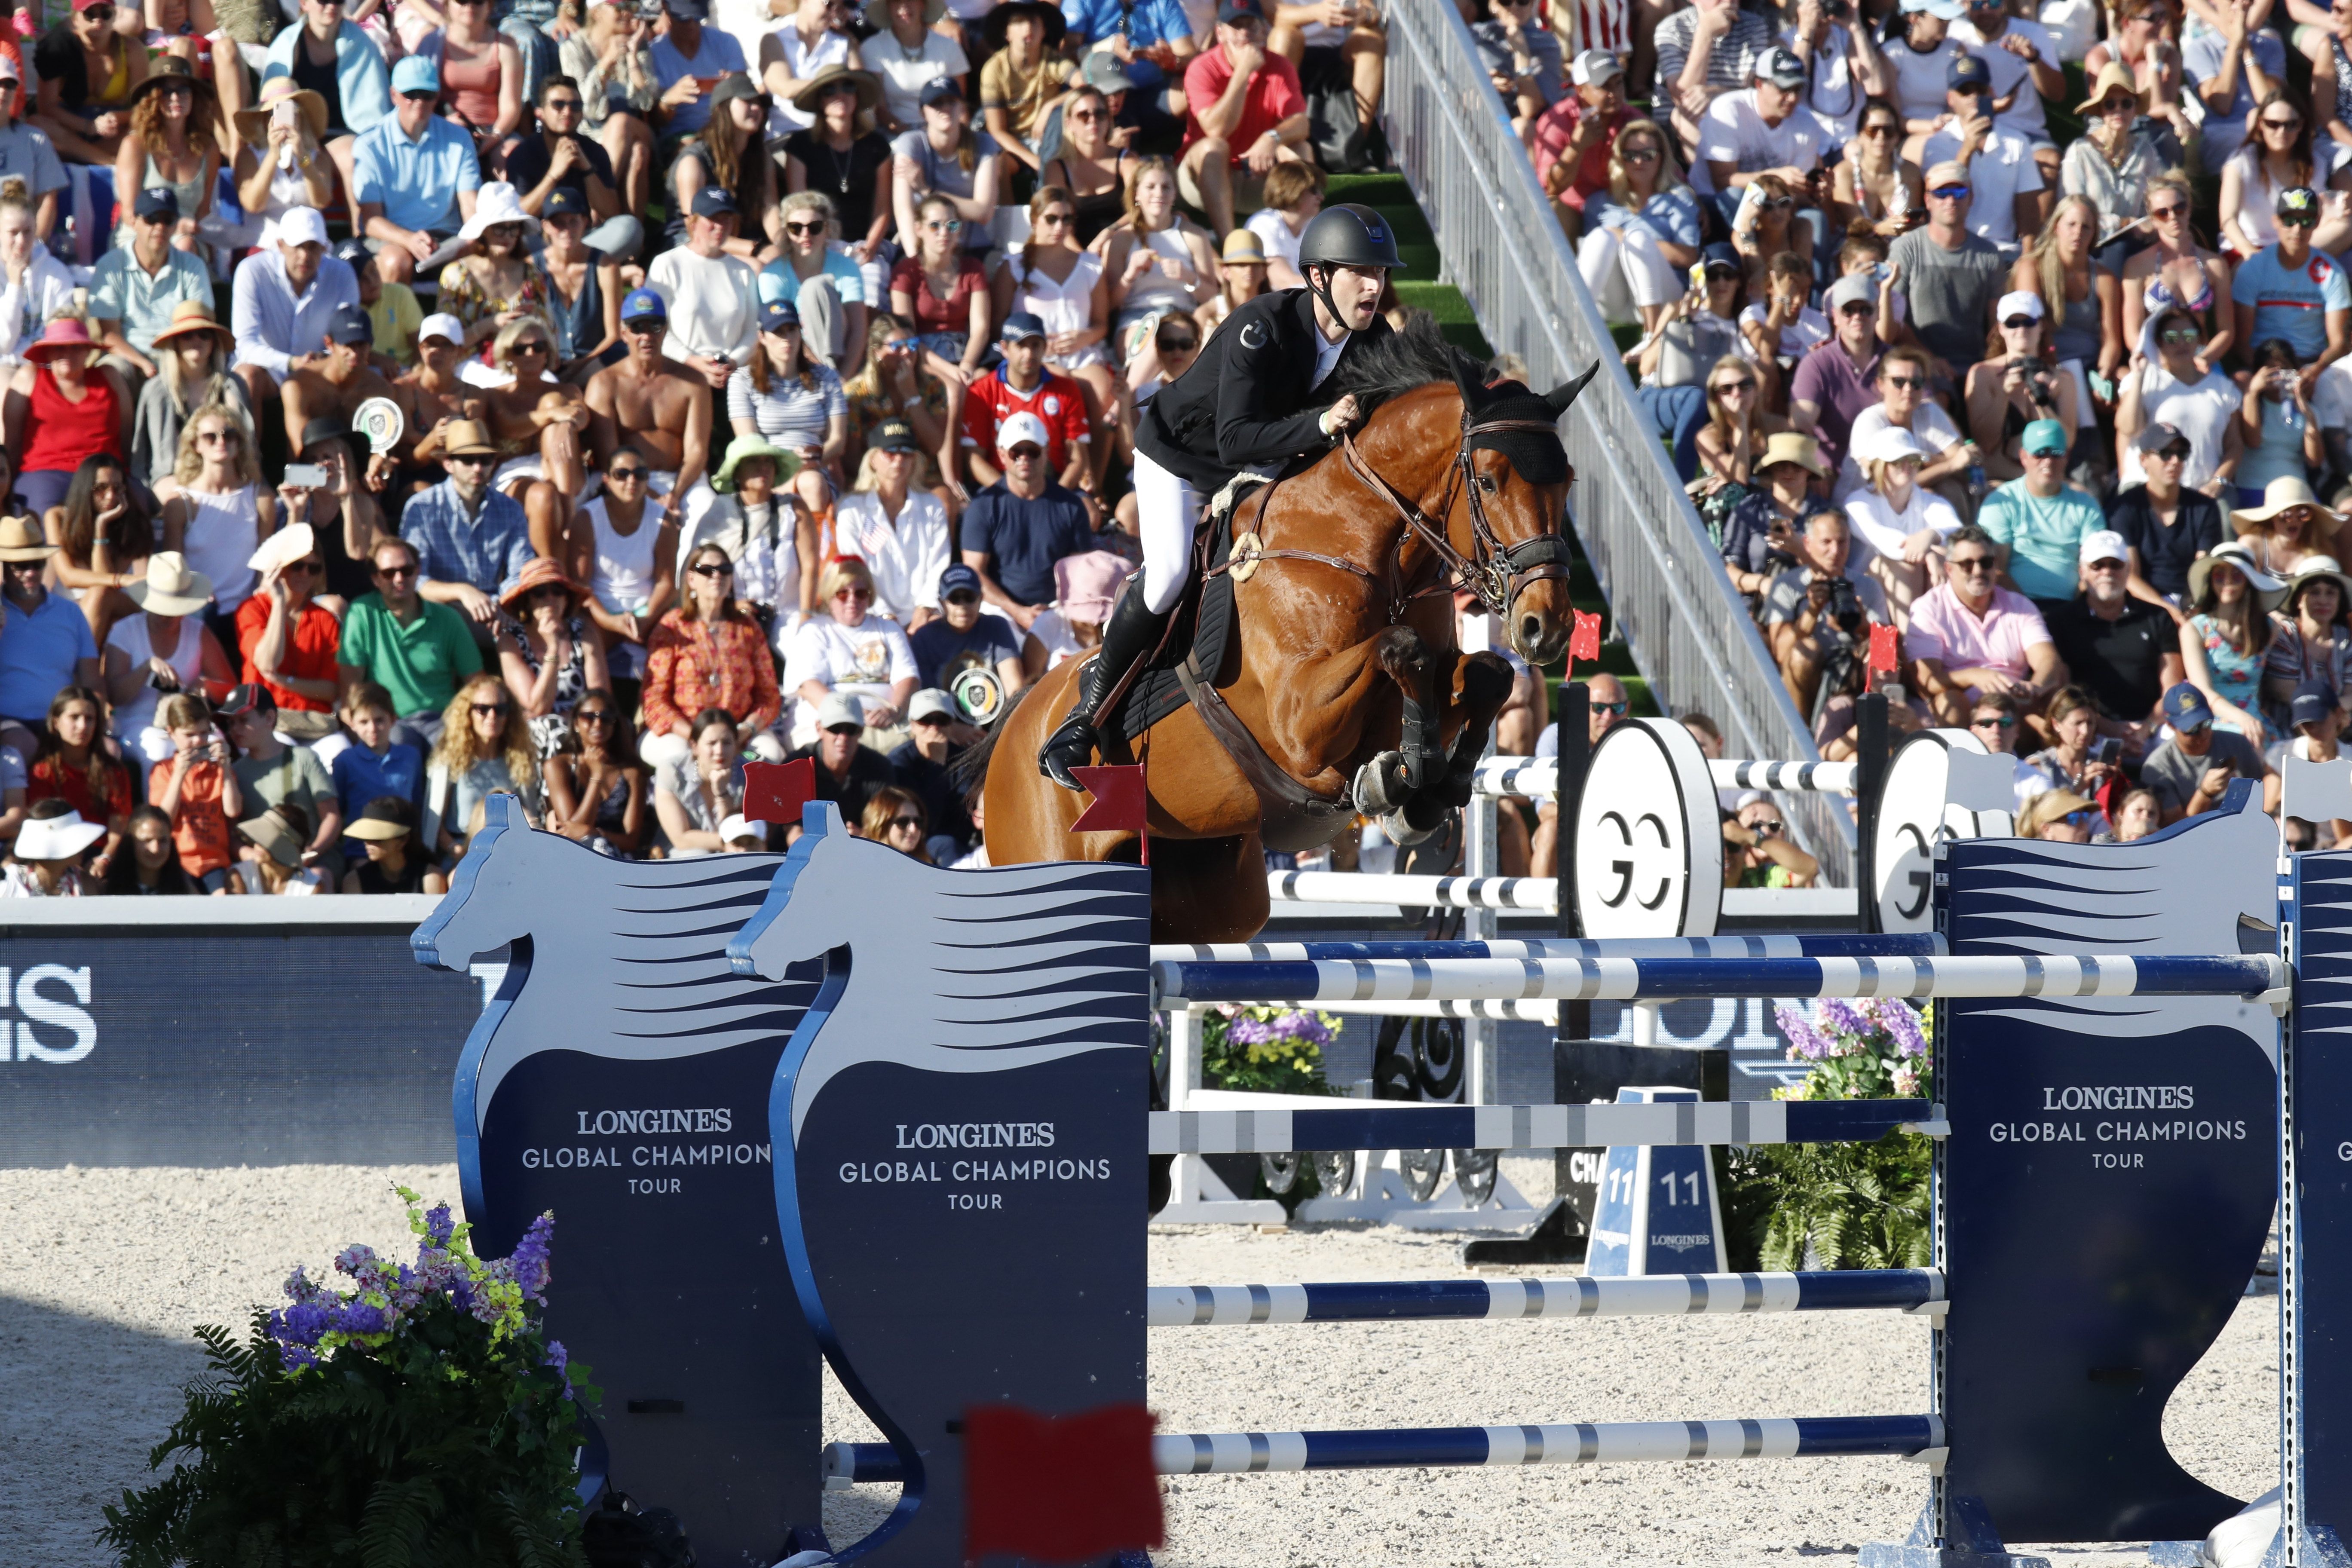 Longines Global Champions New York: Show Jumping GCL Final Star Strikers, An Unmissable and More!